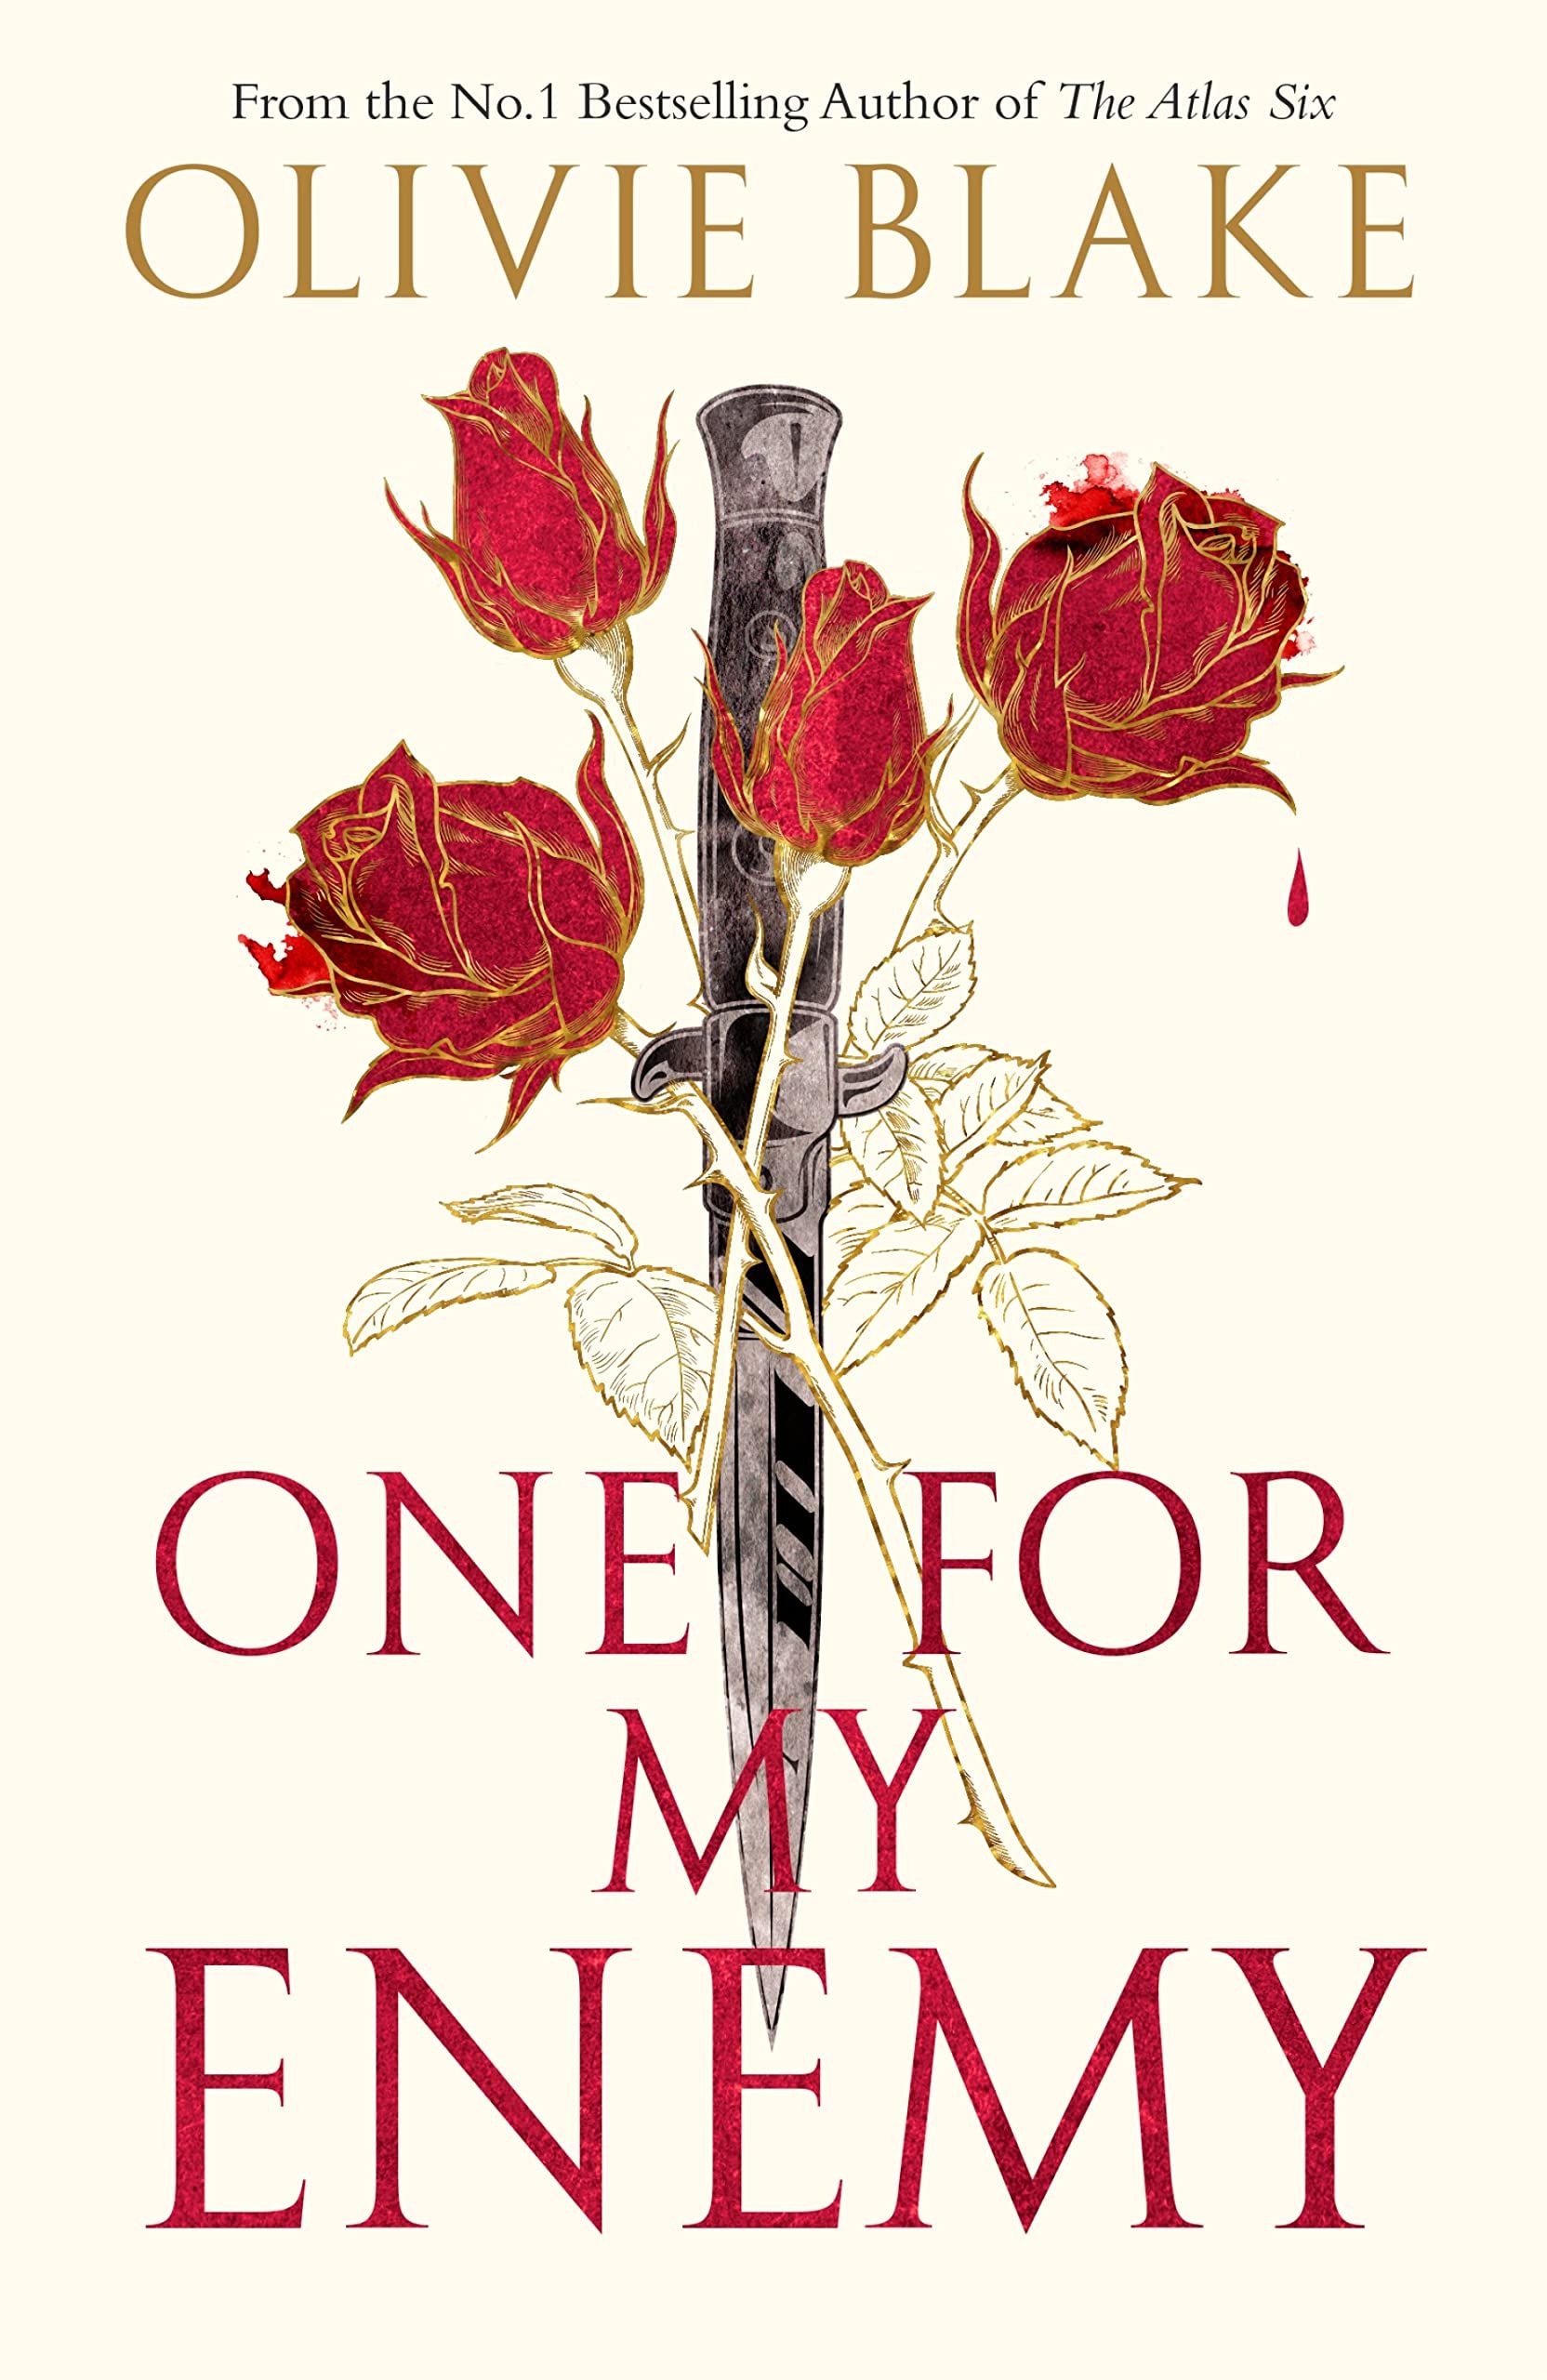 One for my Enemy by Olivie Blake book cover